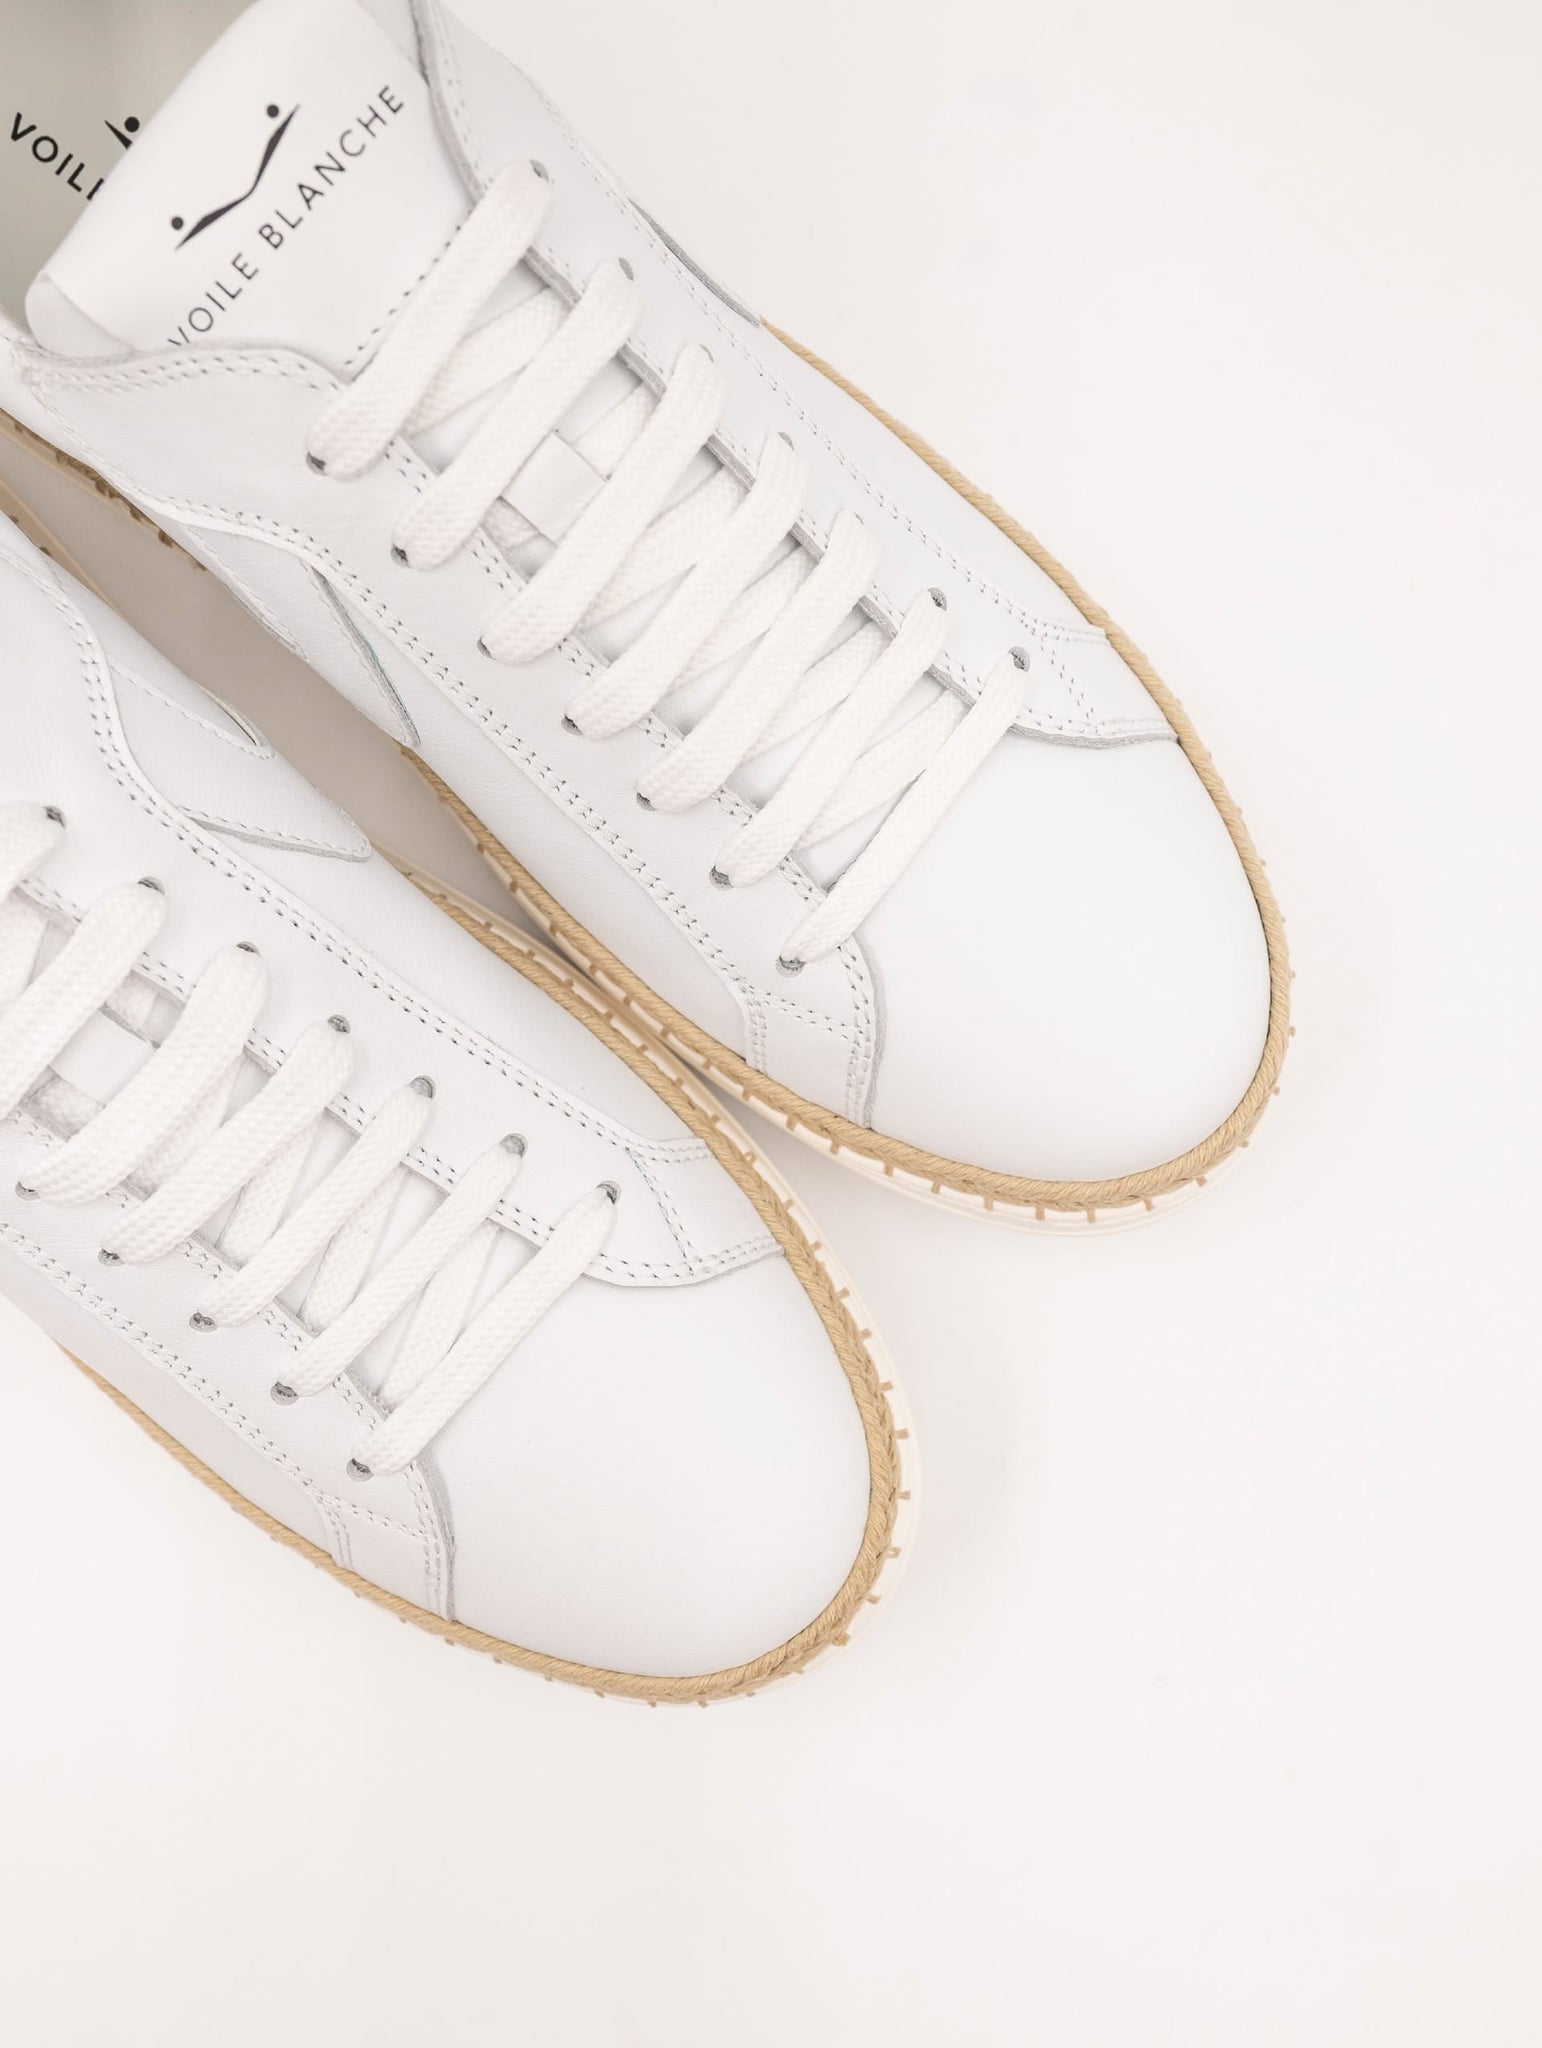 Sneakers Layton Voile Blanche In Pelle e Corda Bianca